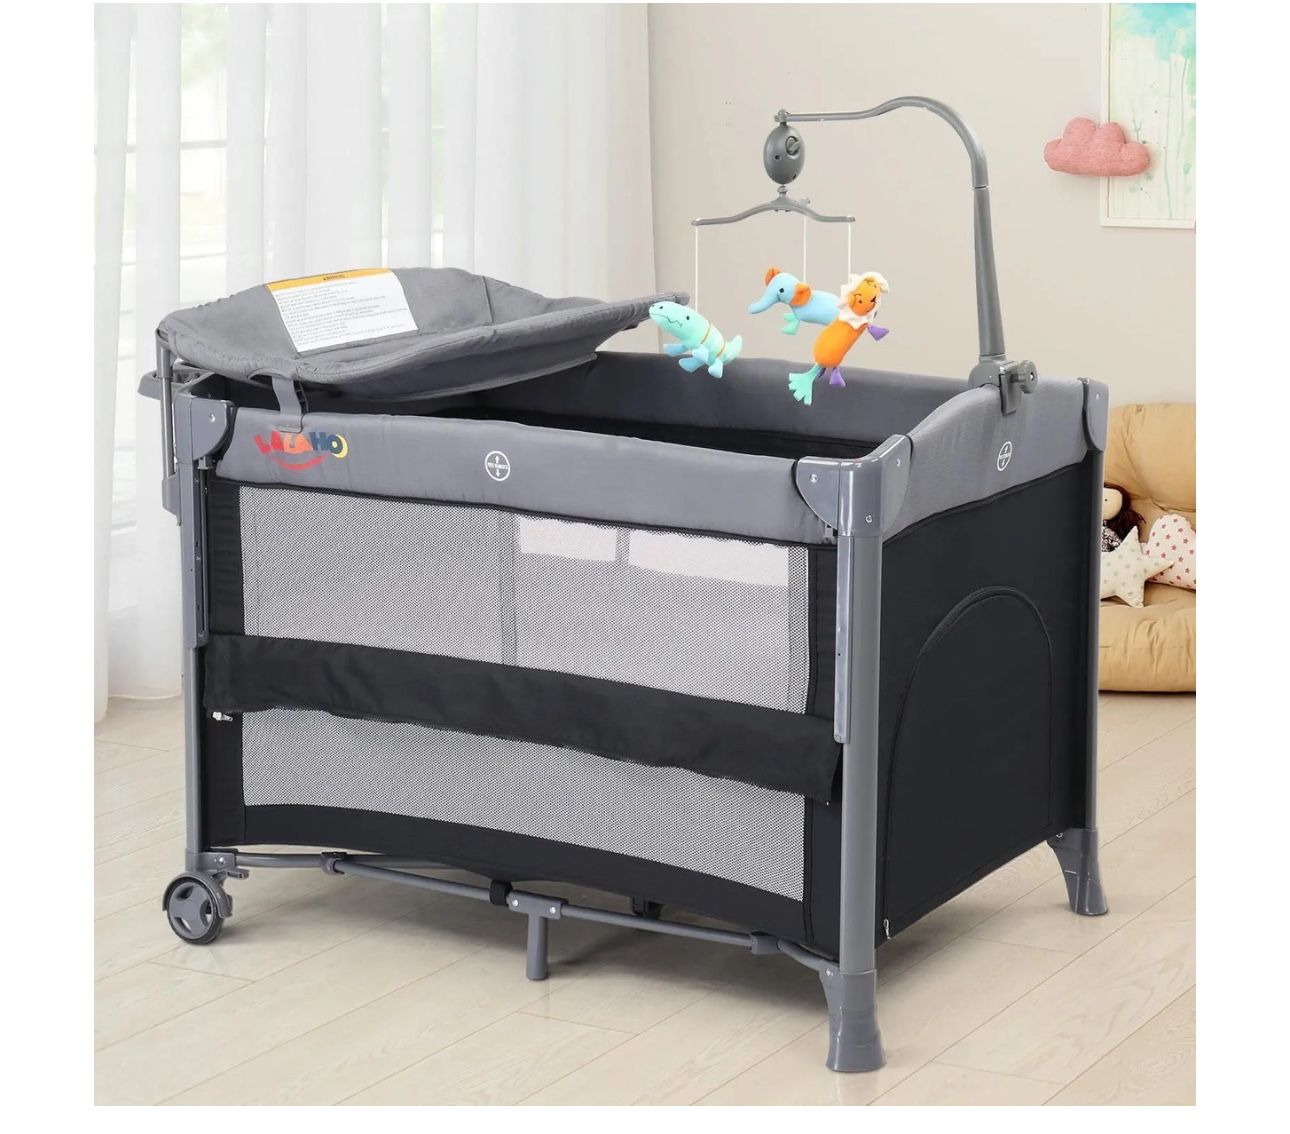 5-in-1 Pack and Play Baby Bassinet Bedside Crib Co Sleeper with Toys & Music Box, Mattress, Foldable Playard, Playpen Travel Bed Nursery Center for Gi